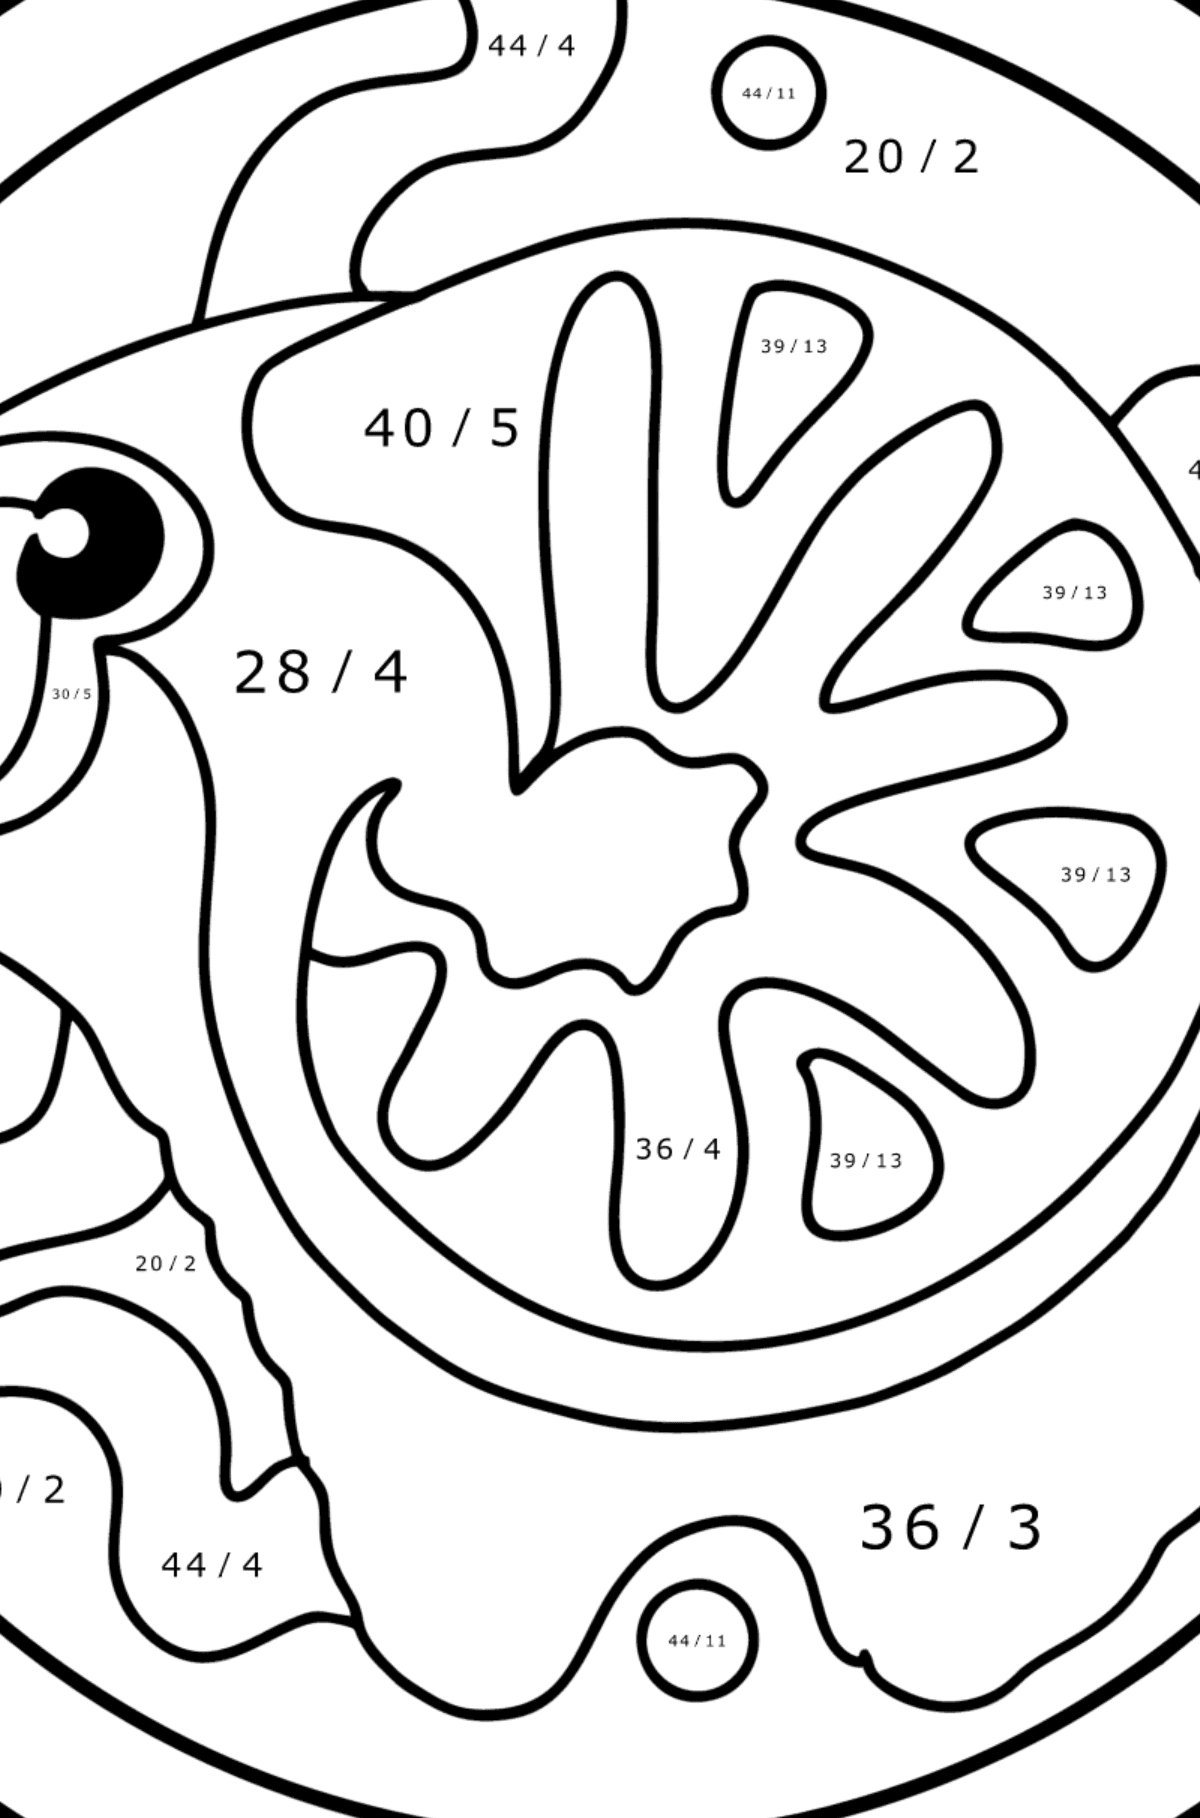 Coloring page for kids - zodiac sign Aries - Math Coloring - Division for Kids